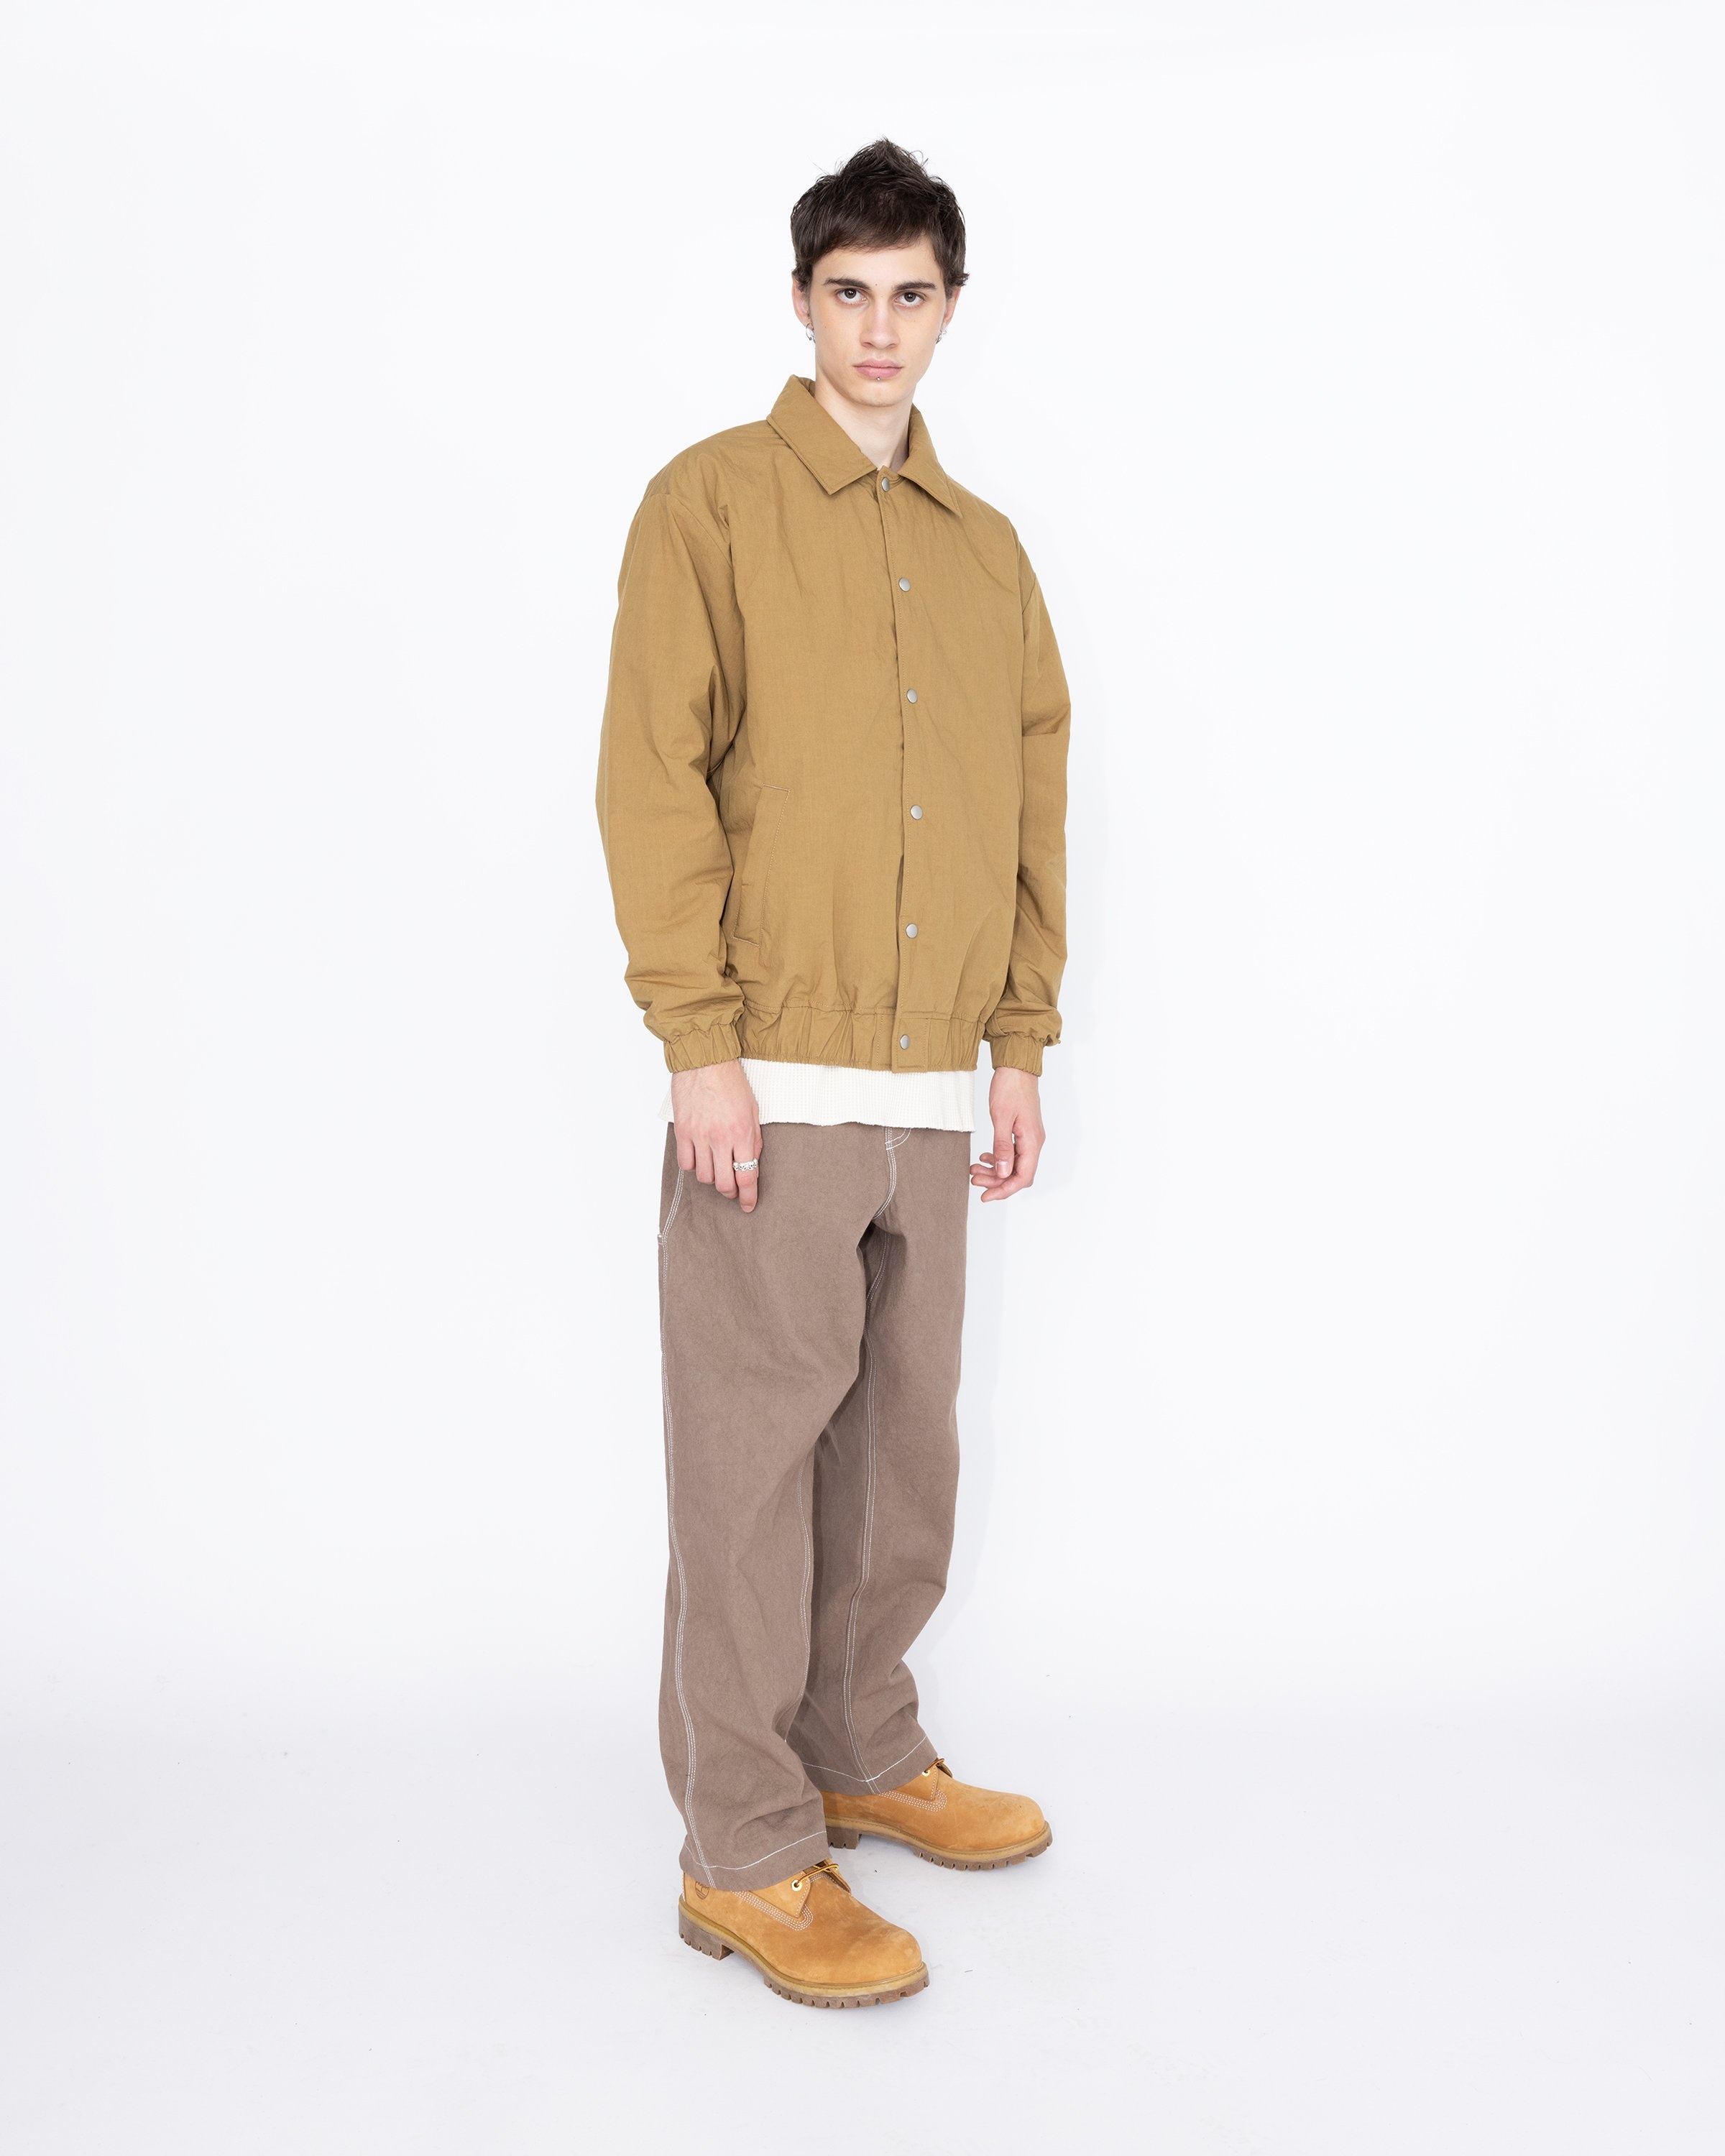 Highsnobiety HS05 – Reverse Piping Insulated Jacket Beige - Outerwear - Beige - Image 4